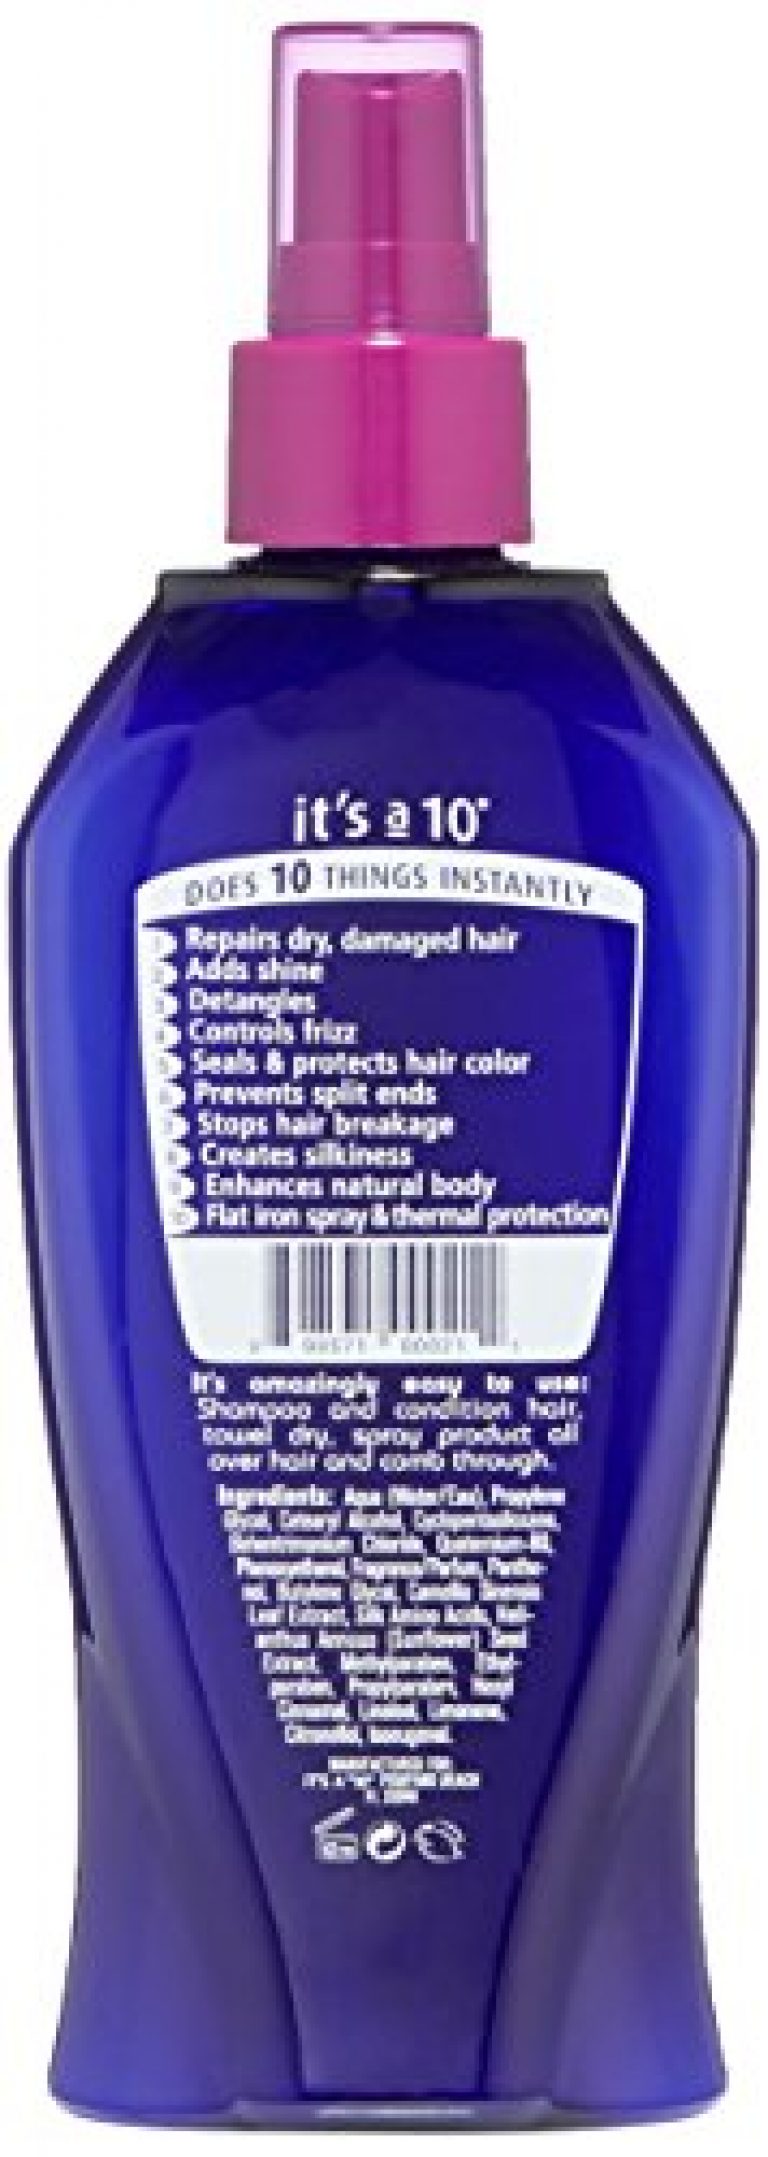 It's A 10 Haircare Miracle Leave-In Conditioner Spray - 10 oz. - 1ct 2